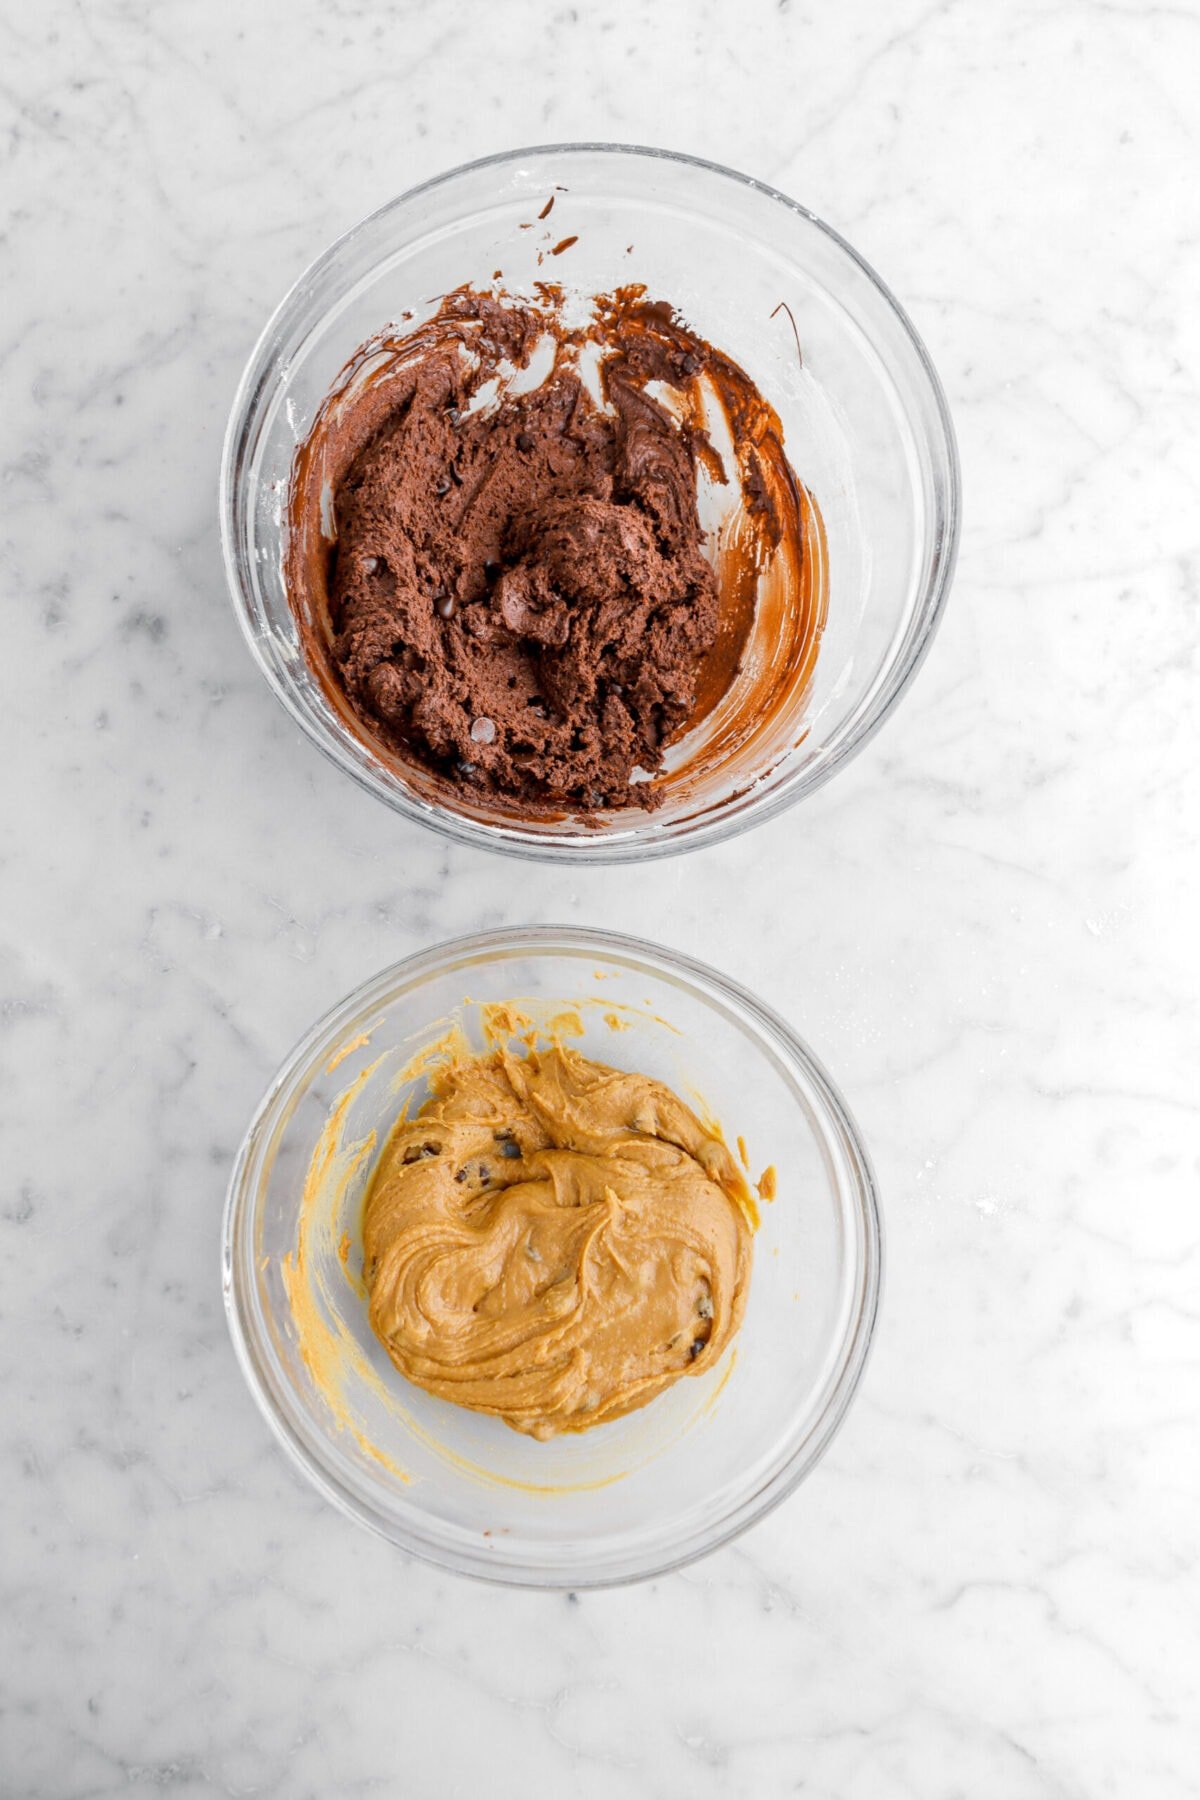 chocolate cookie dough and peanut butter cookie dough in two separate glass bowls.